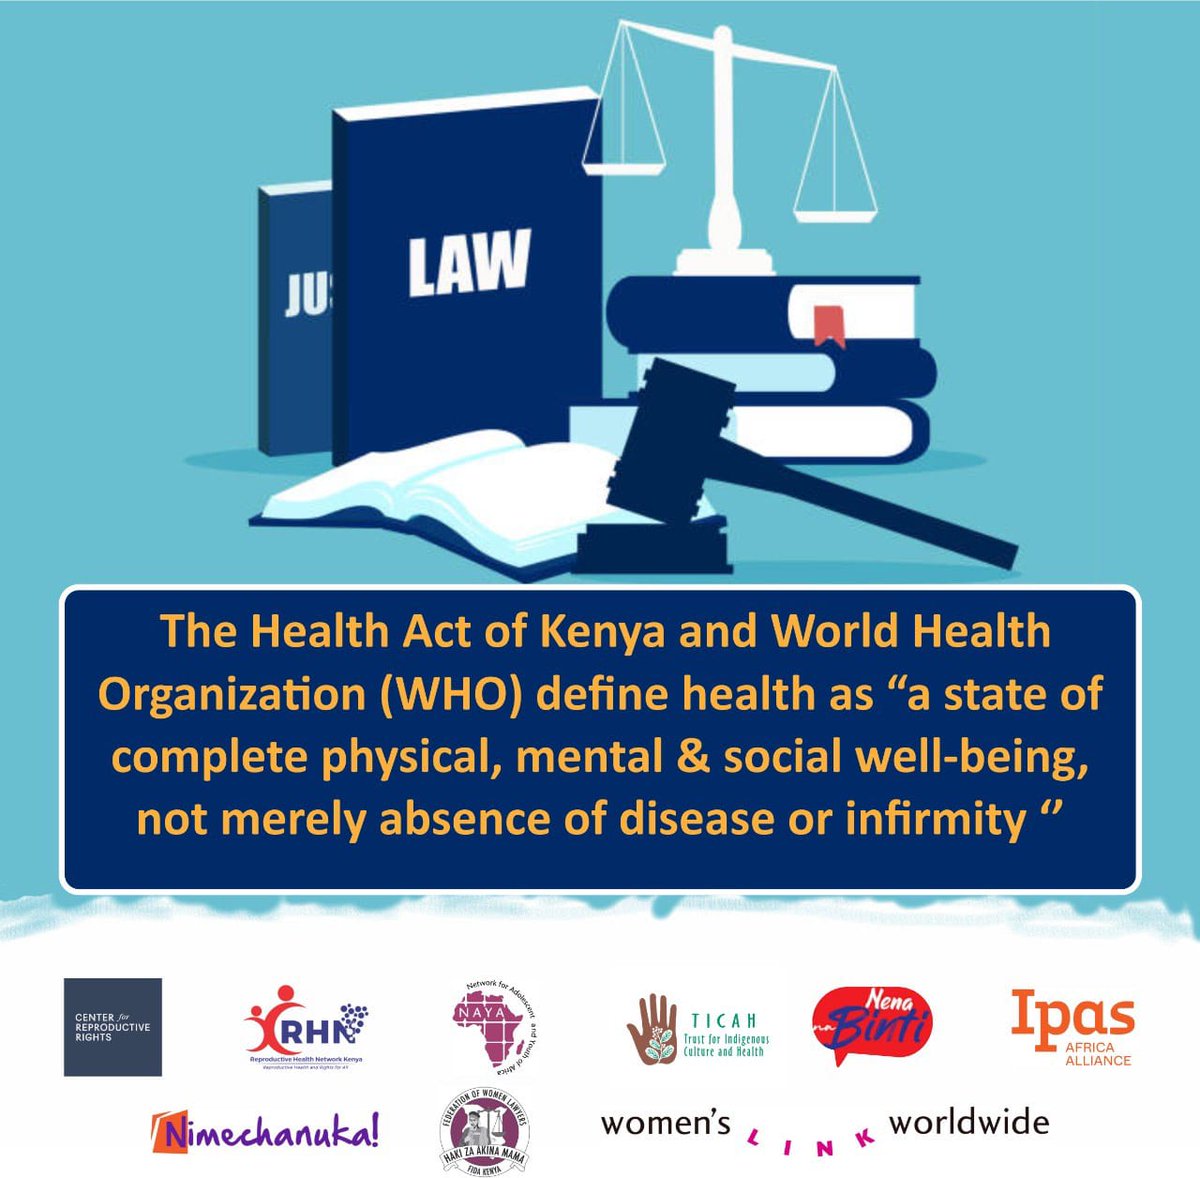 It's crucial to note that mental and social well-being are equally important and adds to our general health wellbeing #DefendHerRightsKE